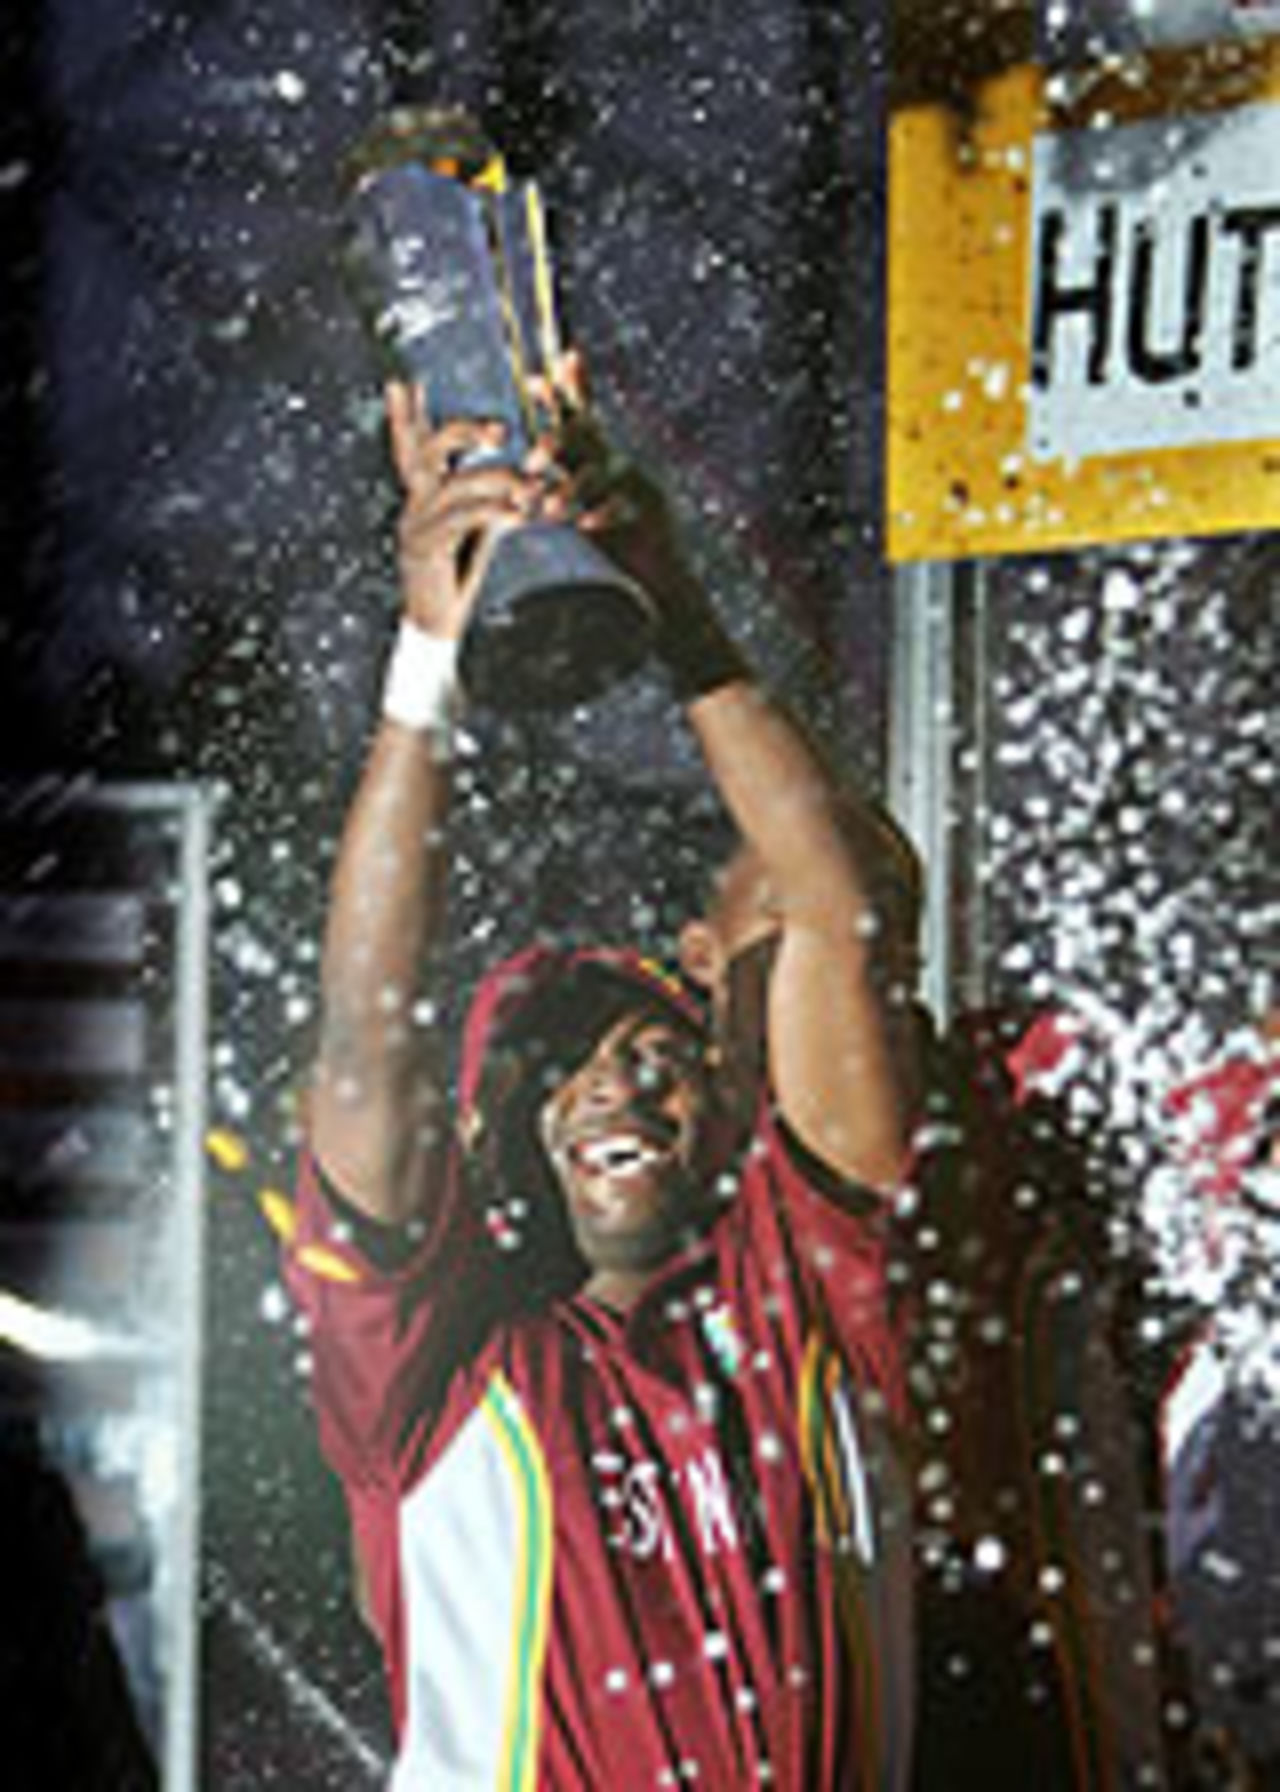 Brian Lara lifts the Champions Trophy, England v West Indies, ICC Champions Trophy final, September 25 2004